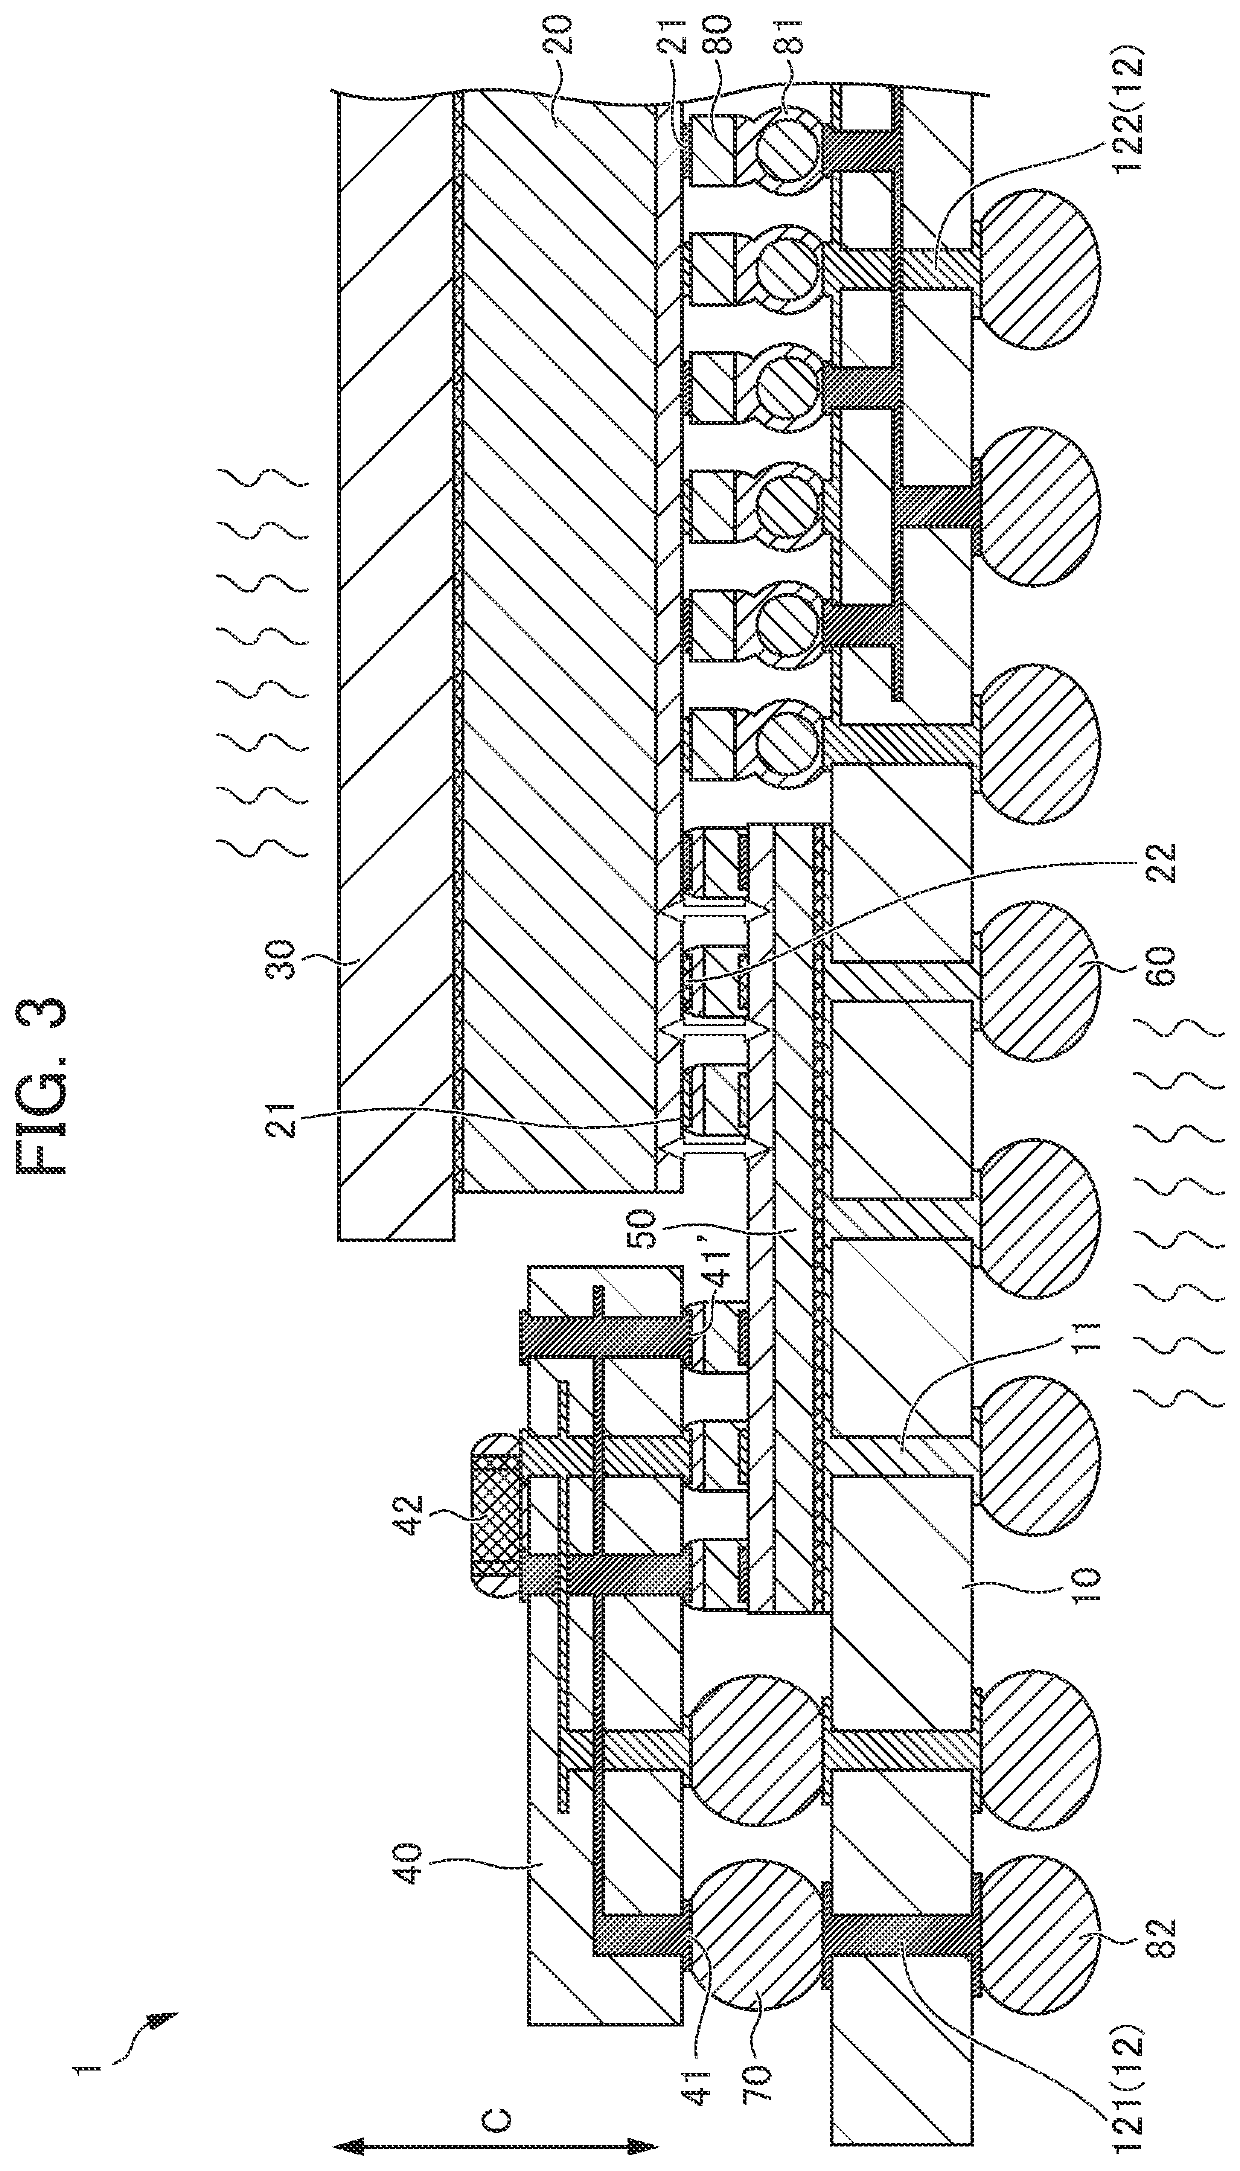 Semiconductor module, semiconductor member, and method for manufacturing the same